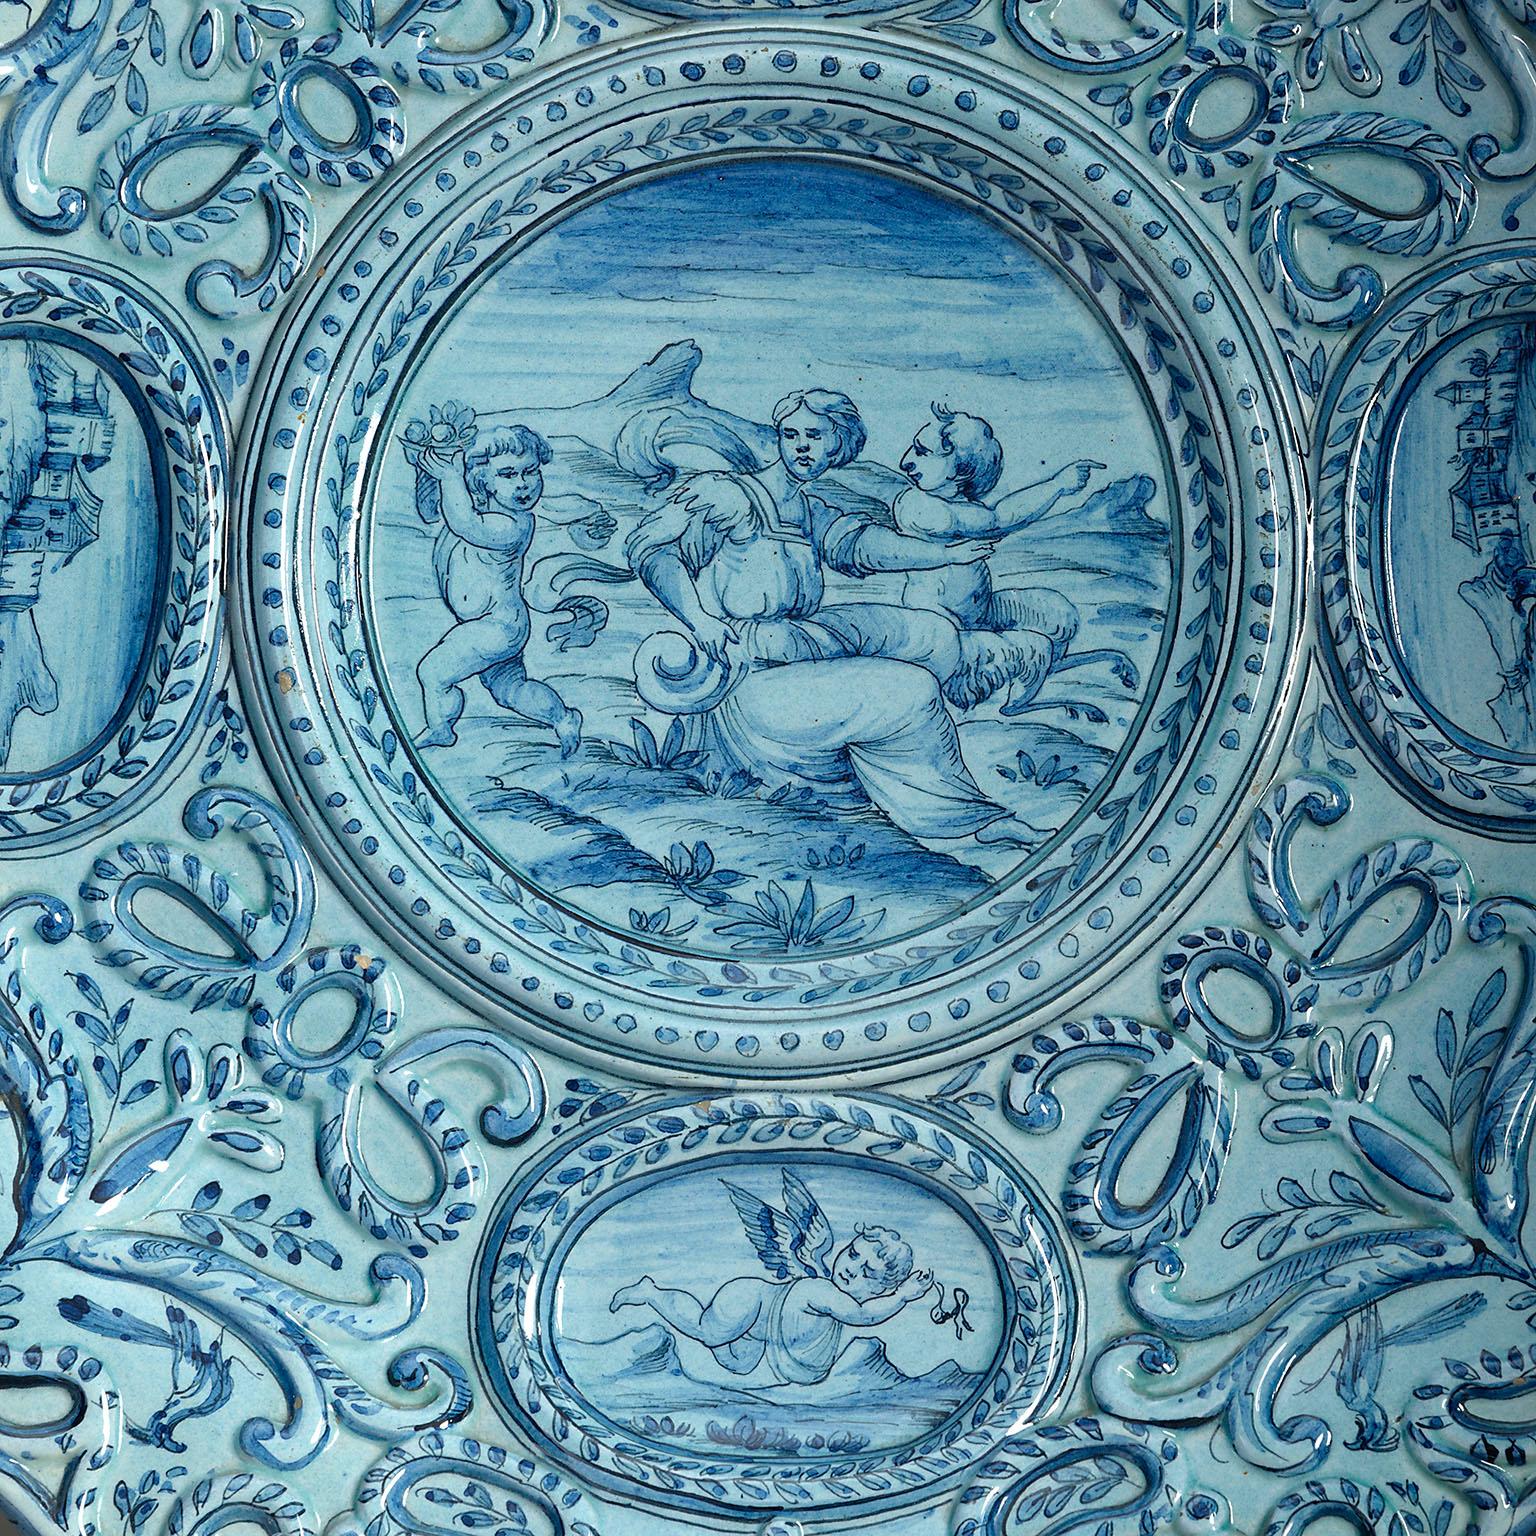 A late nineteenth century blue and white glazed Maiolica charger of large scale, decorated with floral and foliate work, the central circular roundel and surrounding oval cartouches with cherubs and landscapes.

Purchased from a private collection